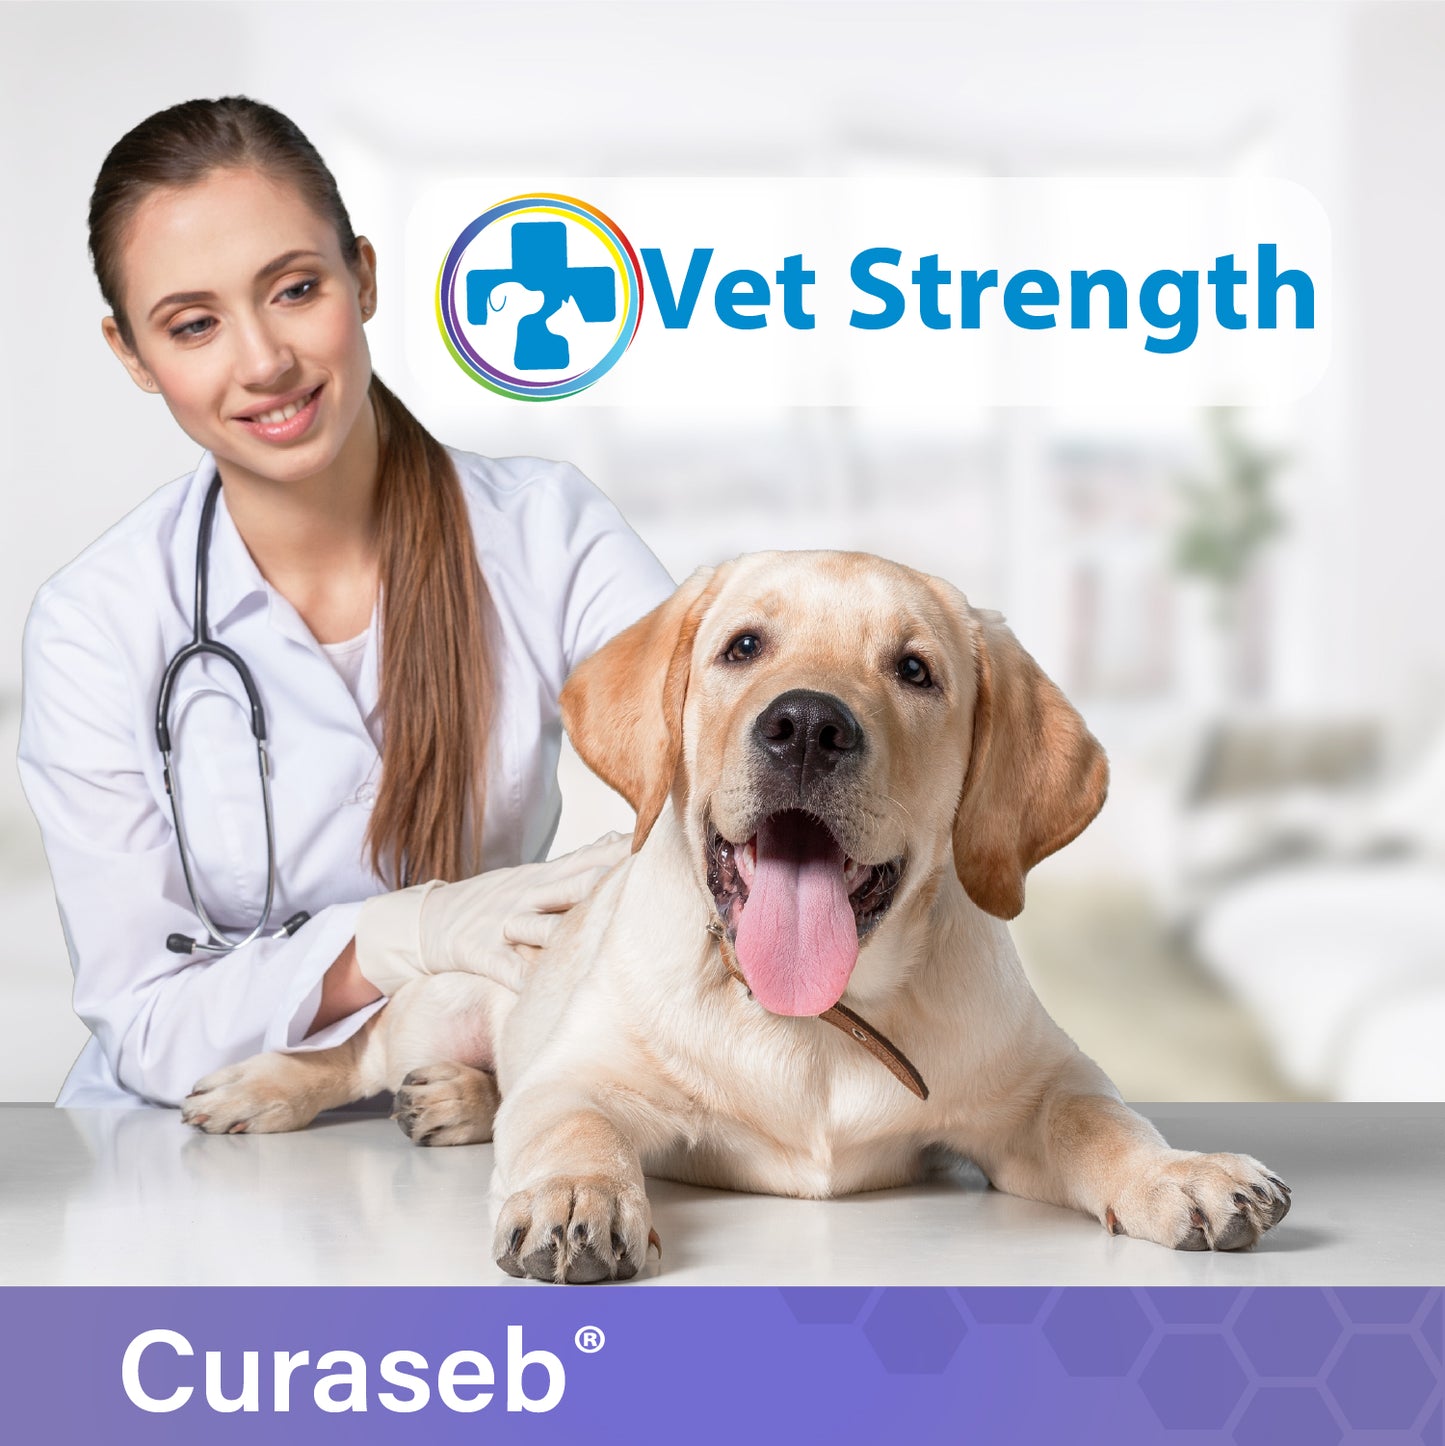 Curaseb Advanced Ear Cleaning Wipes for Dogs & Cats